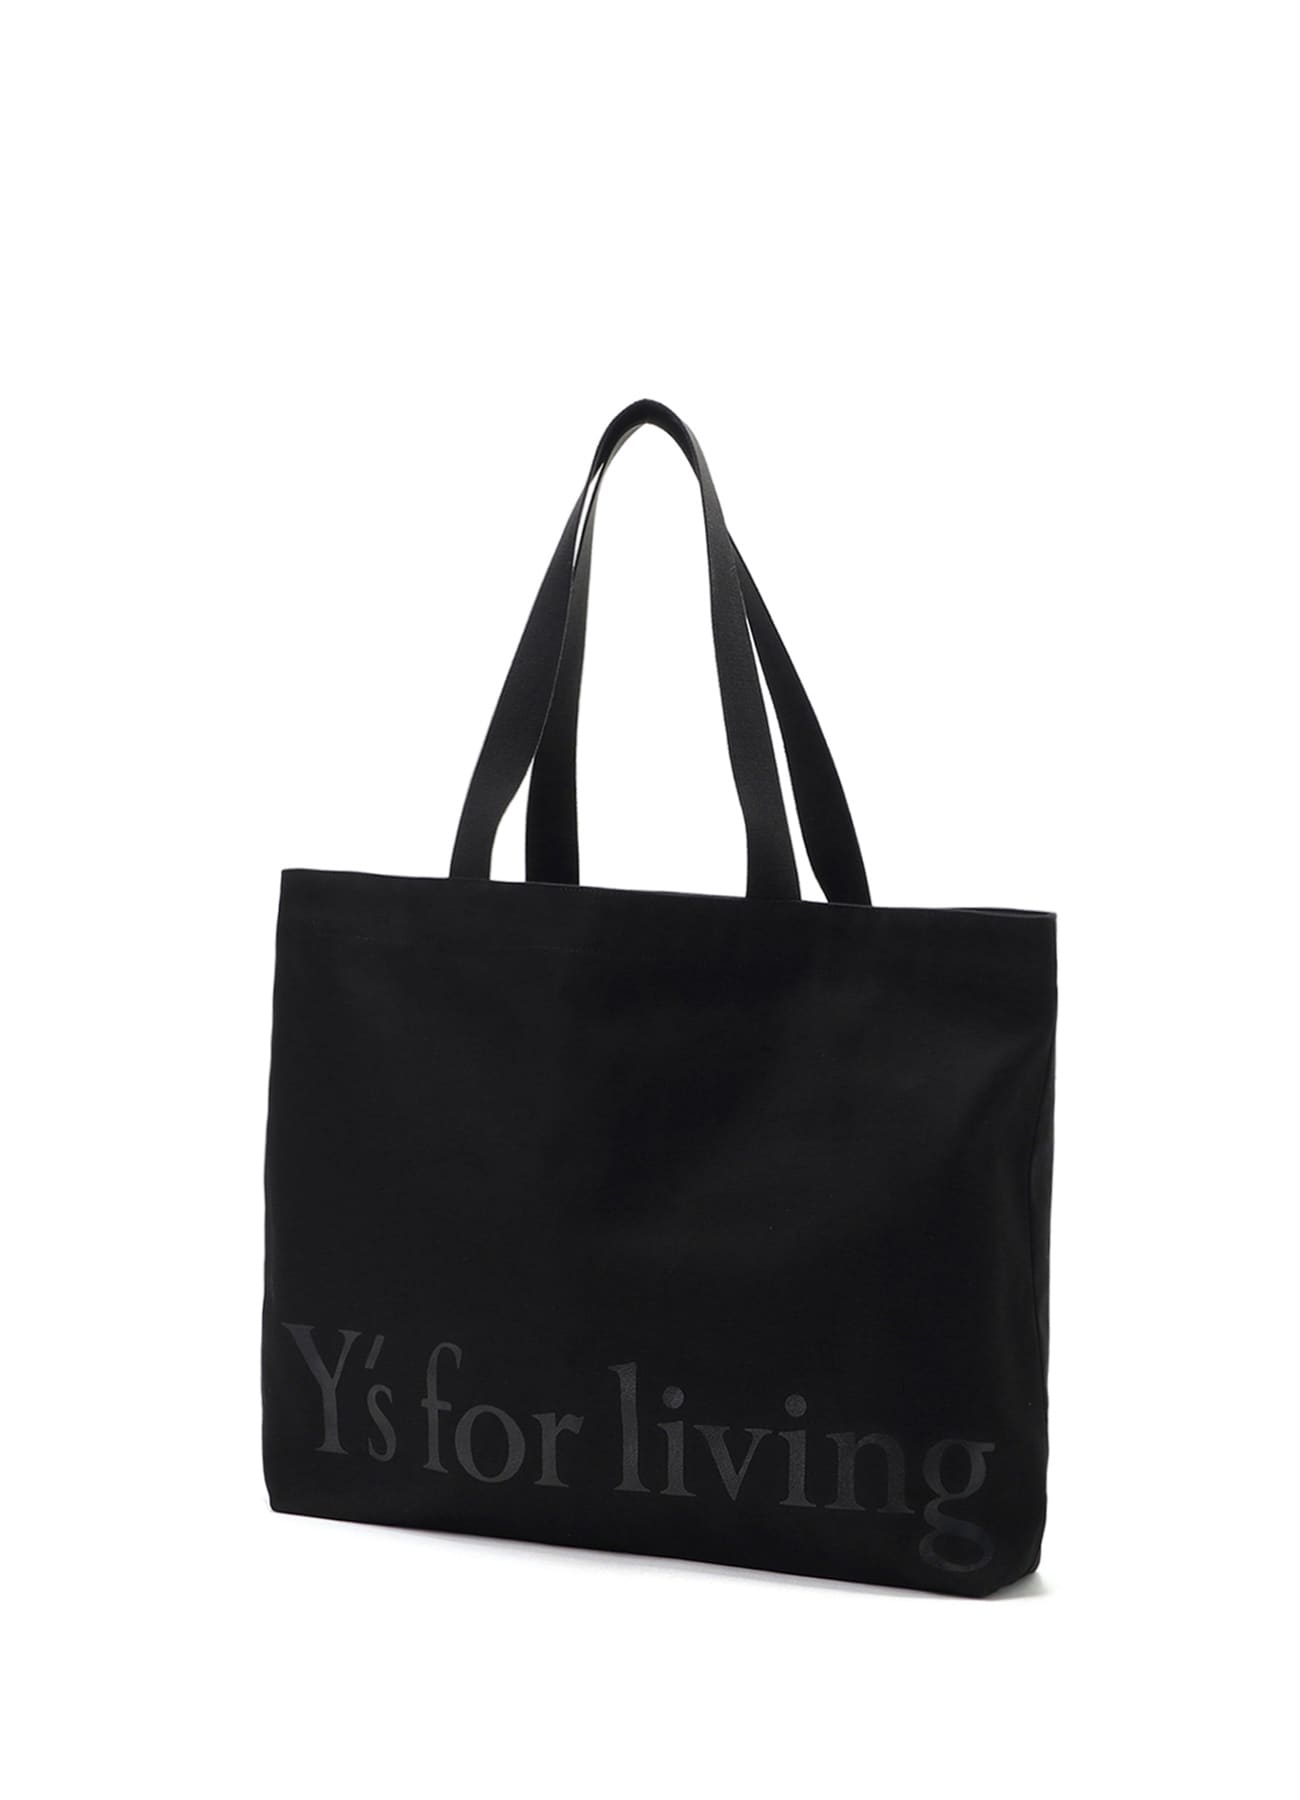 OXFORD LOGO TOTE BAG(FREE SIZE Black): Y's for living｜THE SHOP 